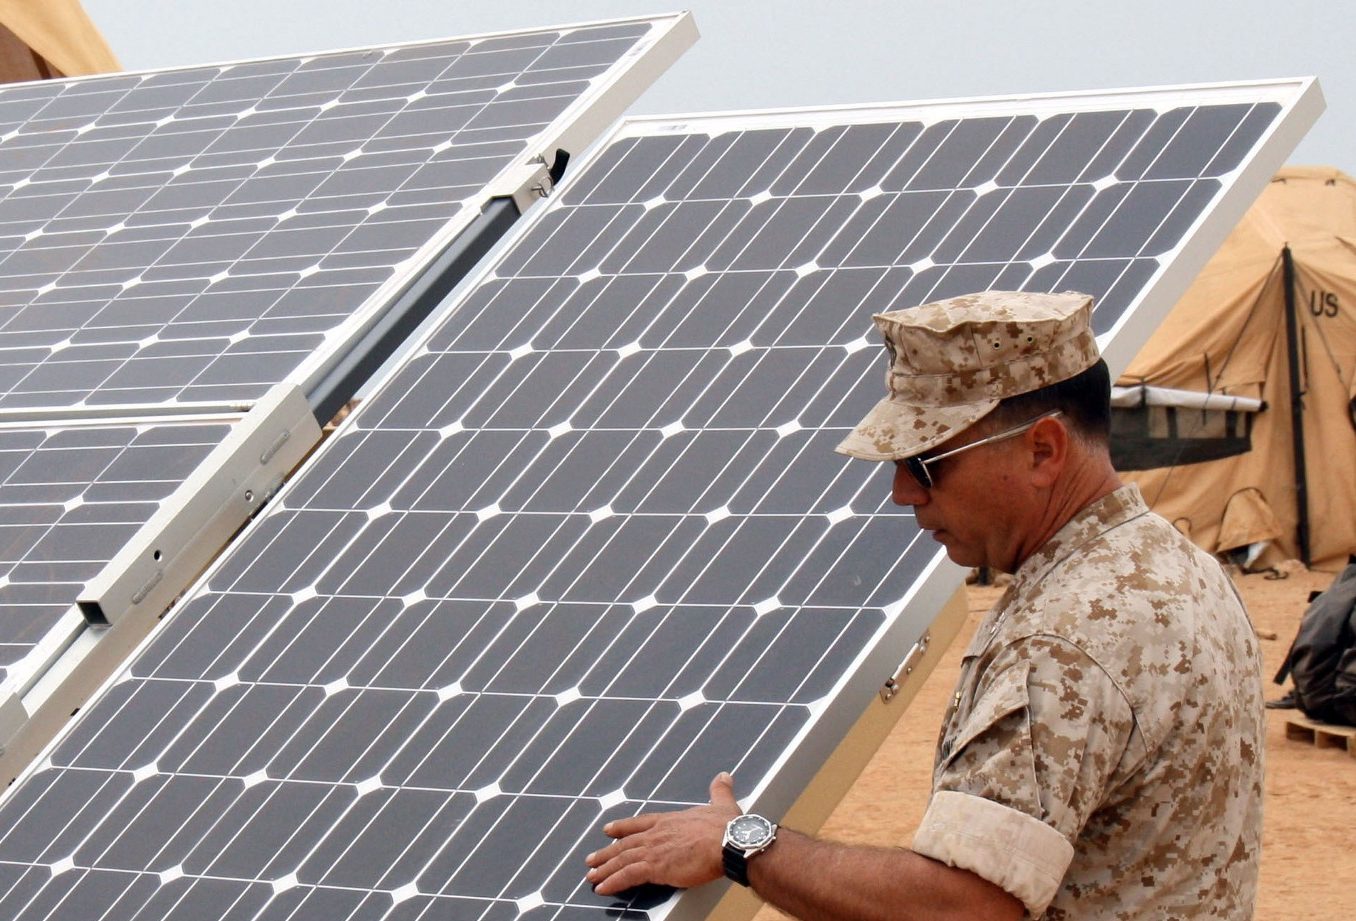 service members next to solar panels